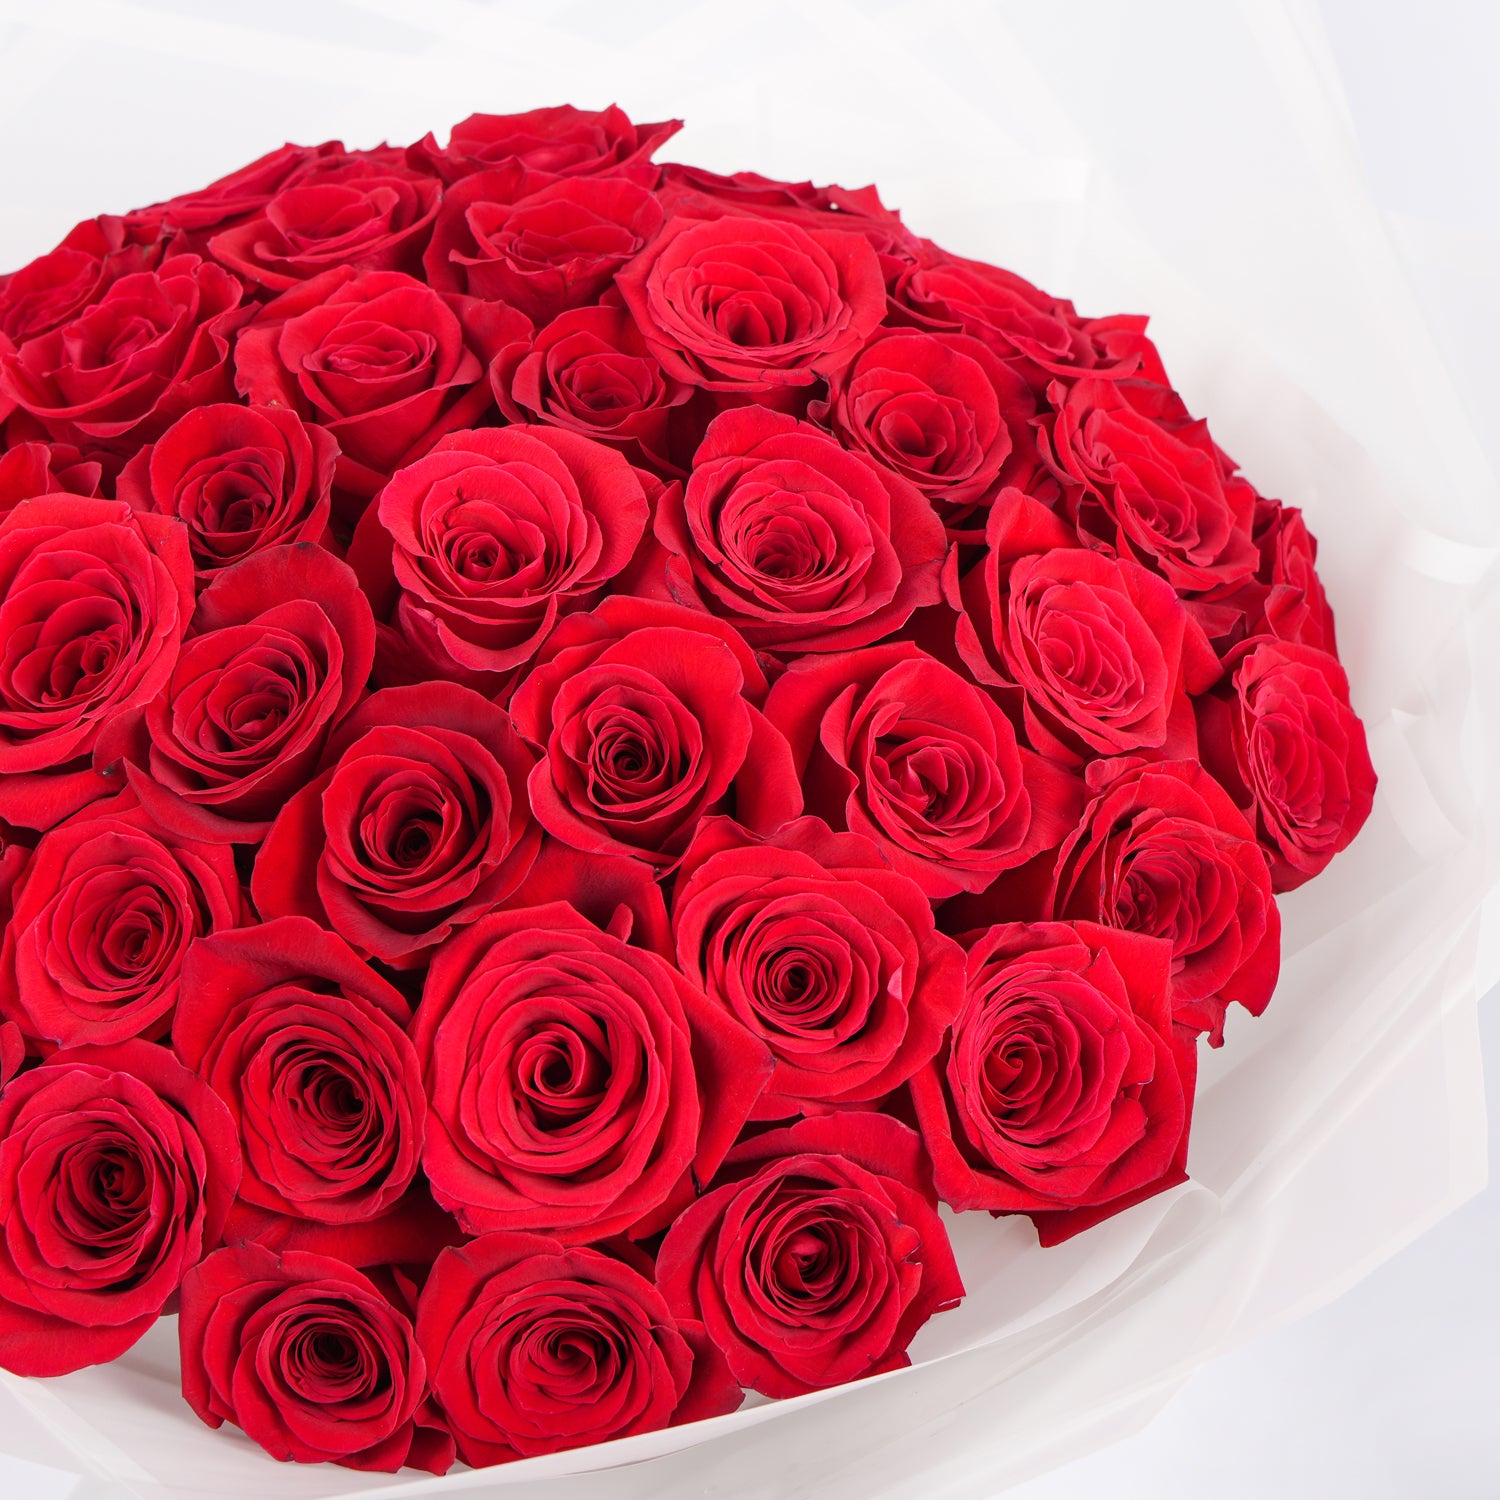 Red Roses Graduation Hand Bouquet